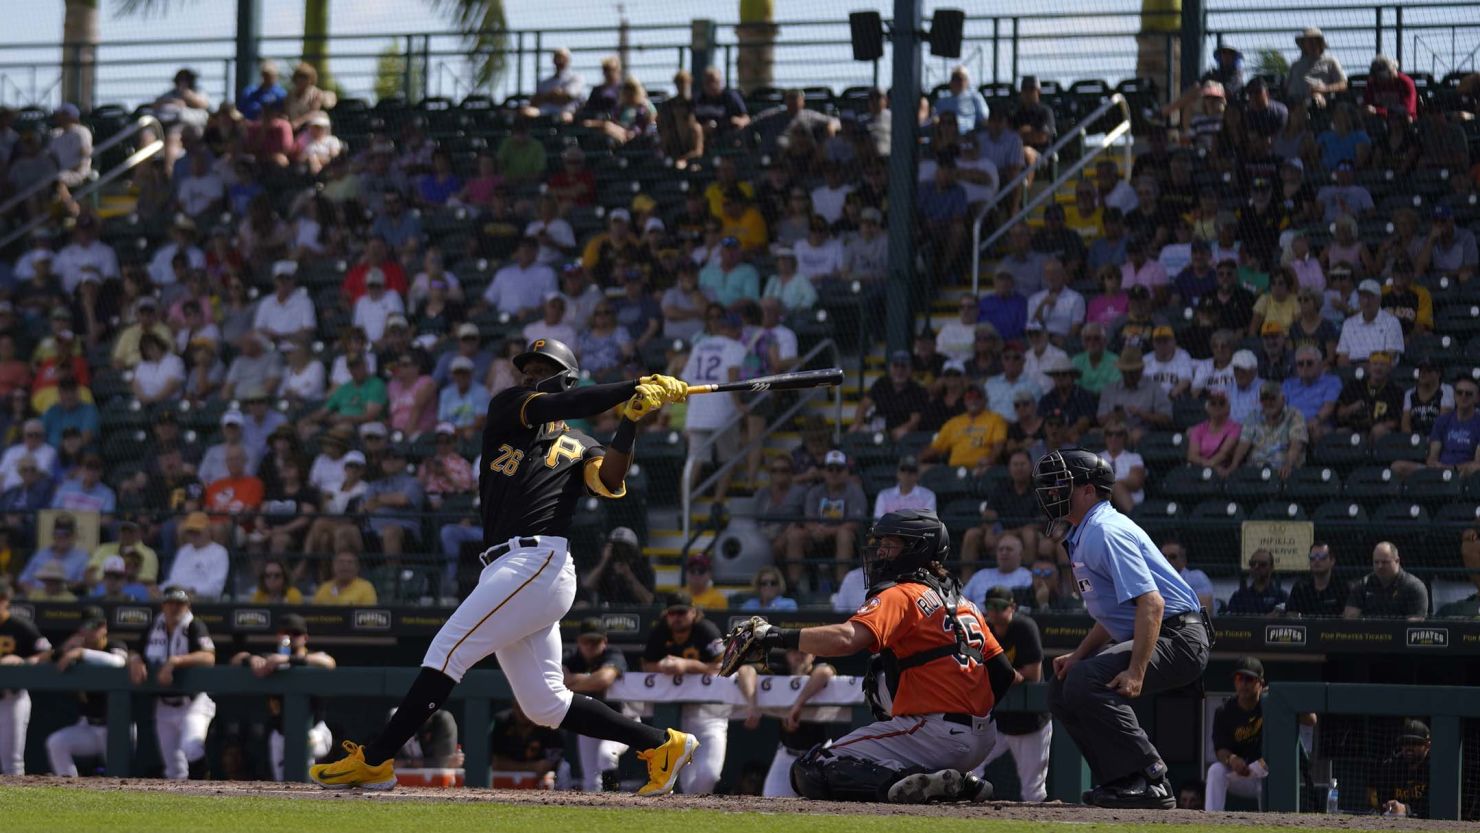 The Pittsburgh Pirates' Miguel Andujar bats in the second inning during a spring training game against the Baltimore Orioles.